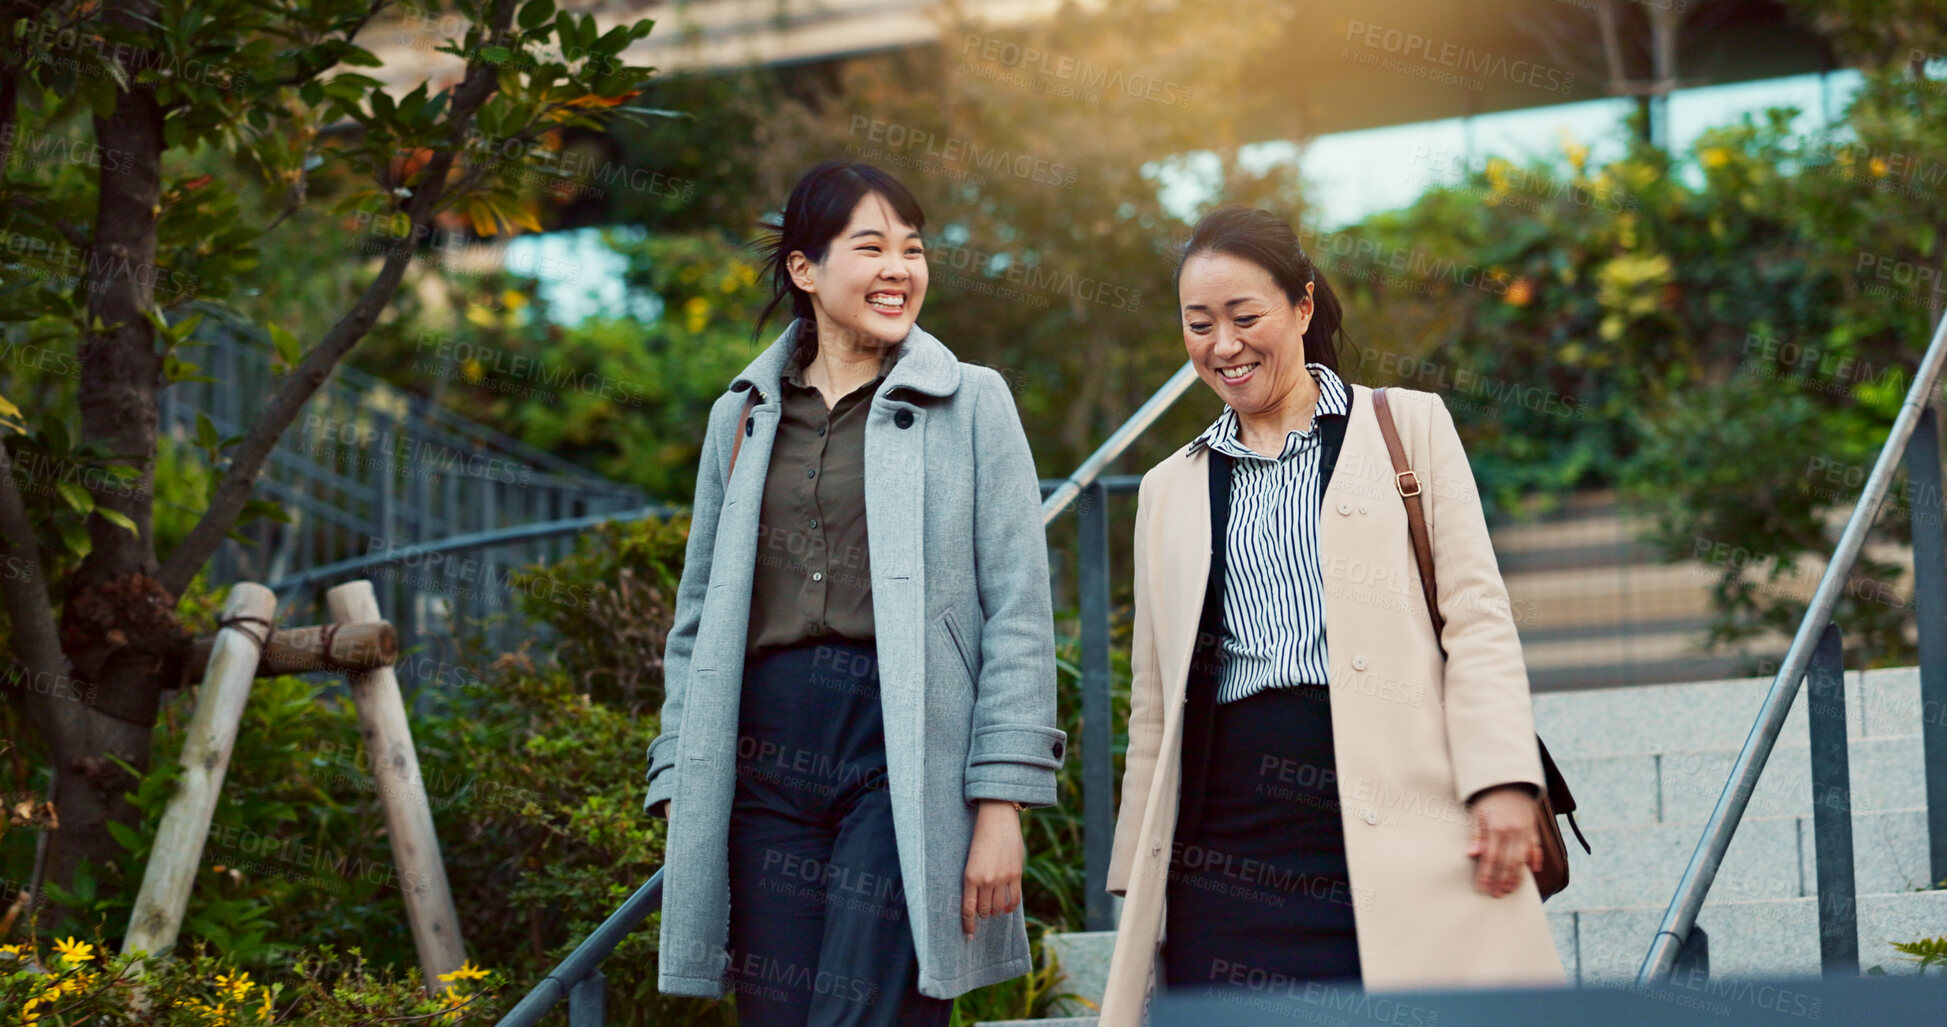 Buy stock photo Walking, conversation and business women in the city talking for communication or bonding. Smile, discussion and professional Asian female people speaking and laughing together commuting in town.